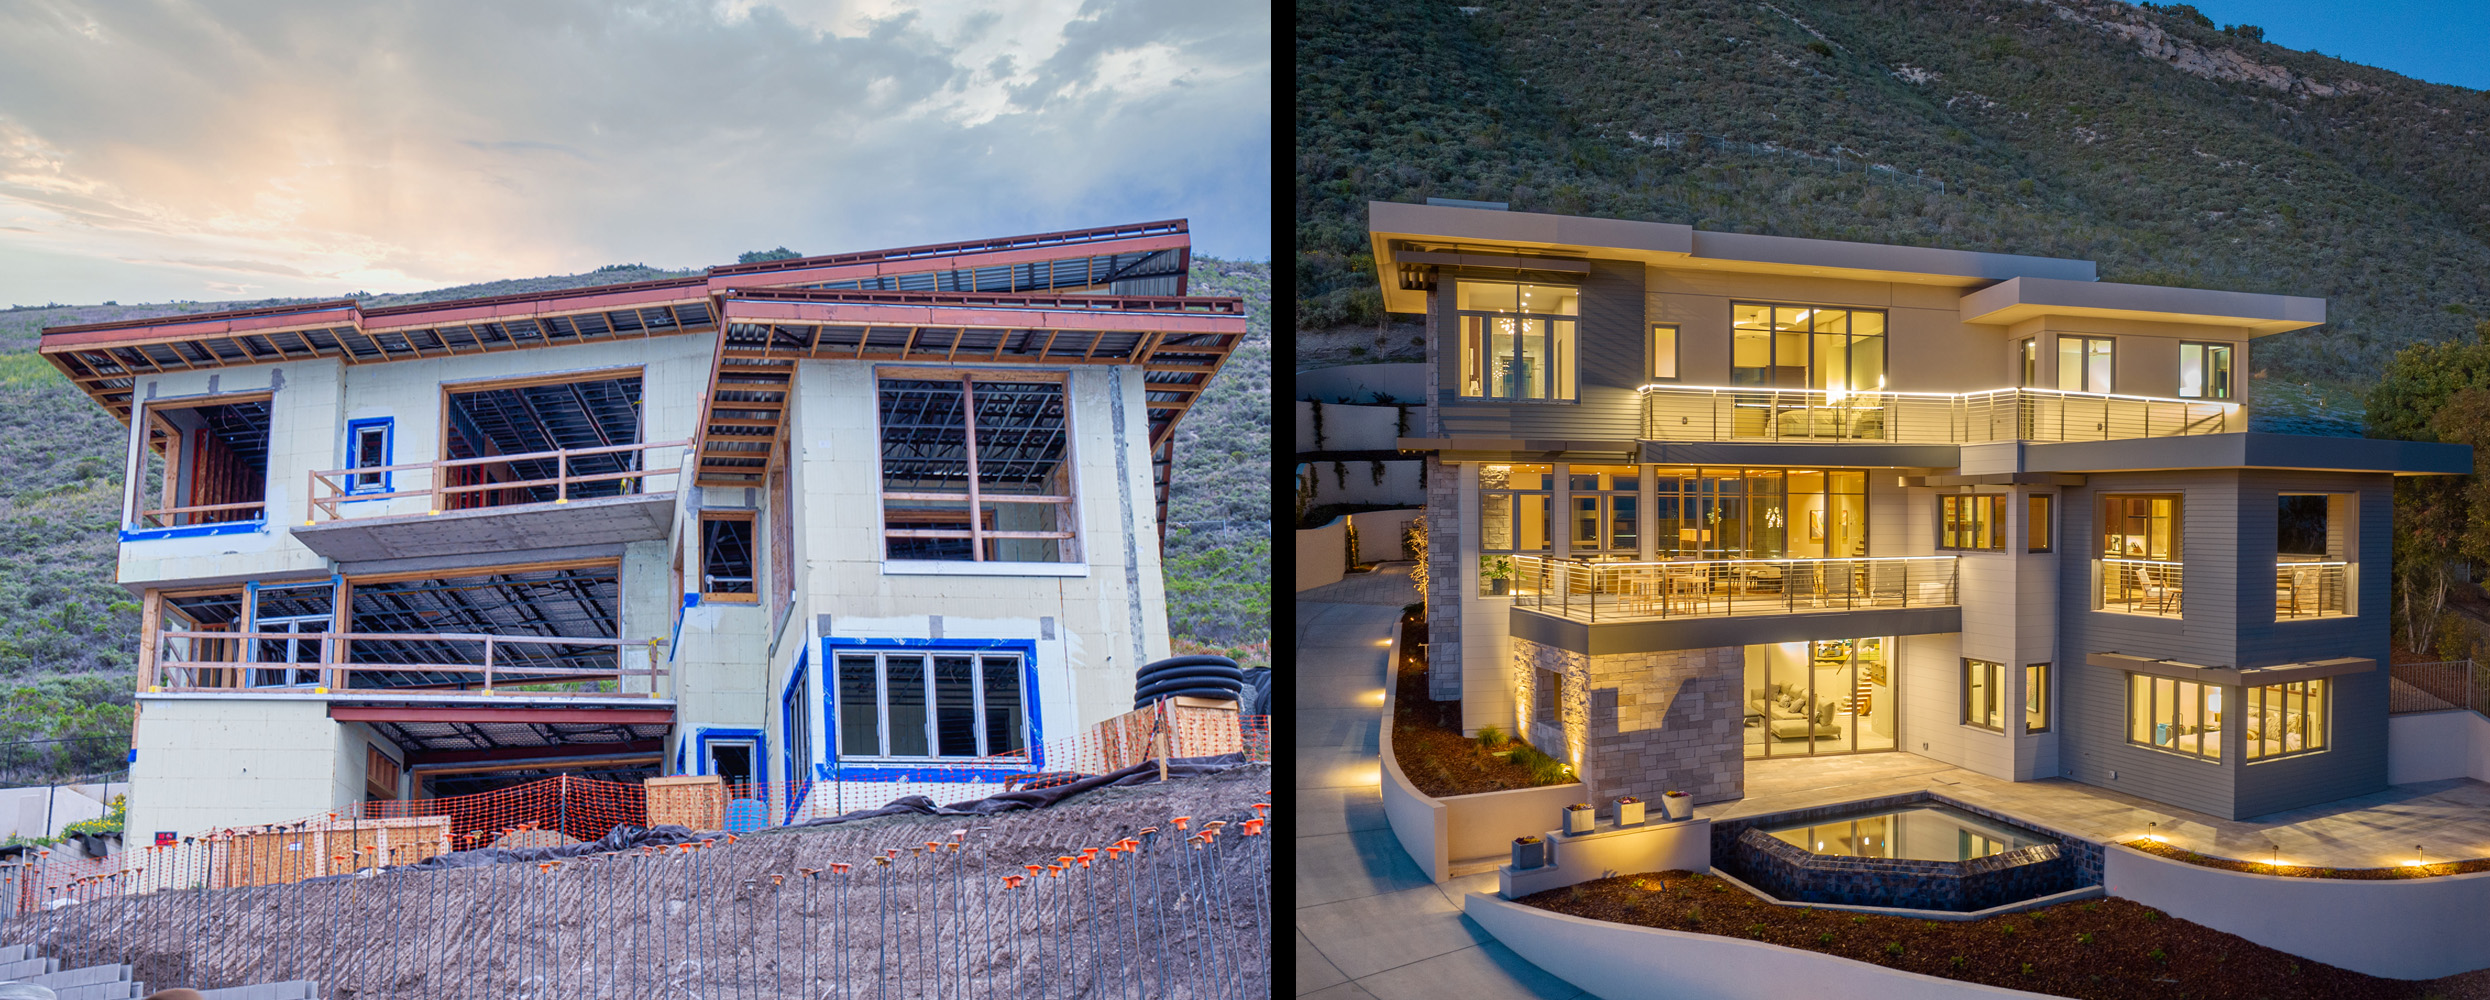 icf custom home before and after construction